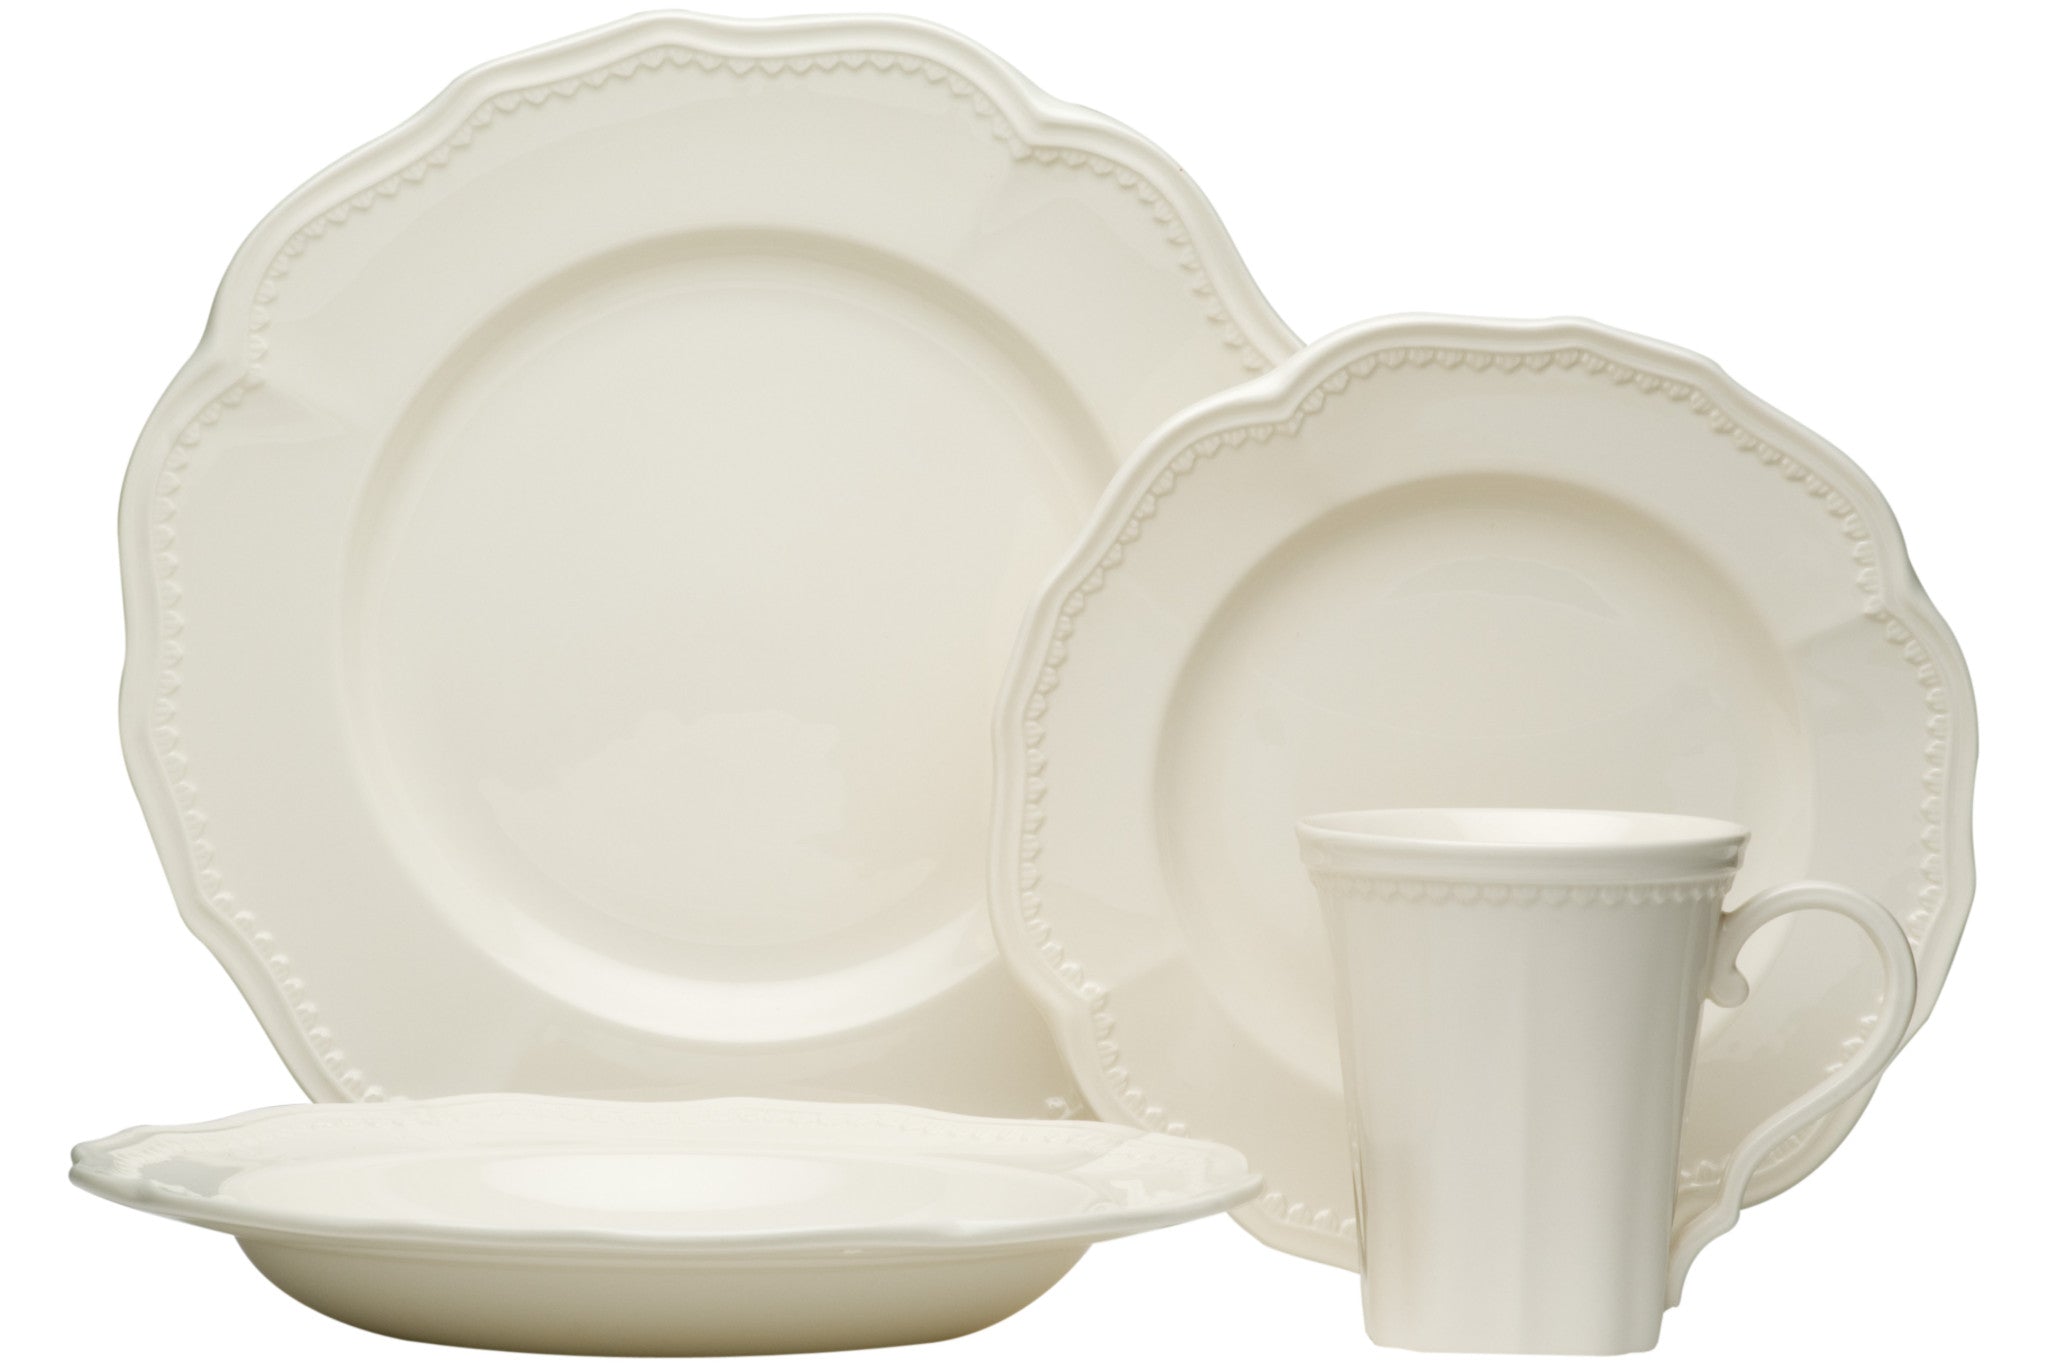 White Four Piece Scallop Stoneware Service For Four Dinner Plate Set